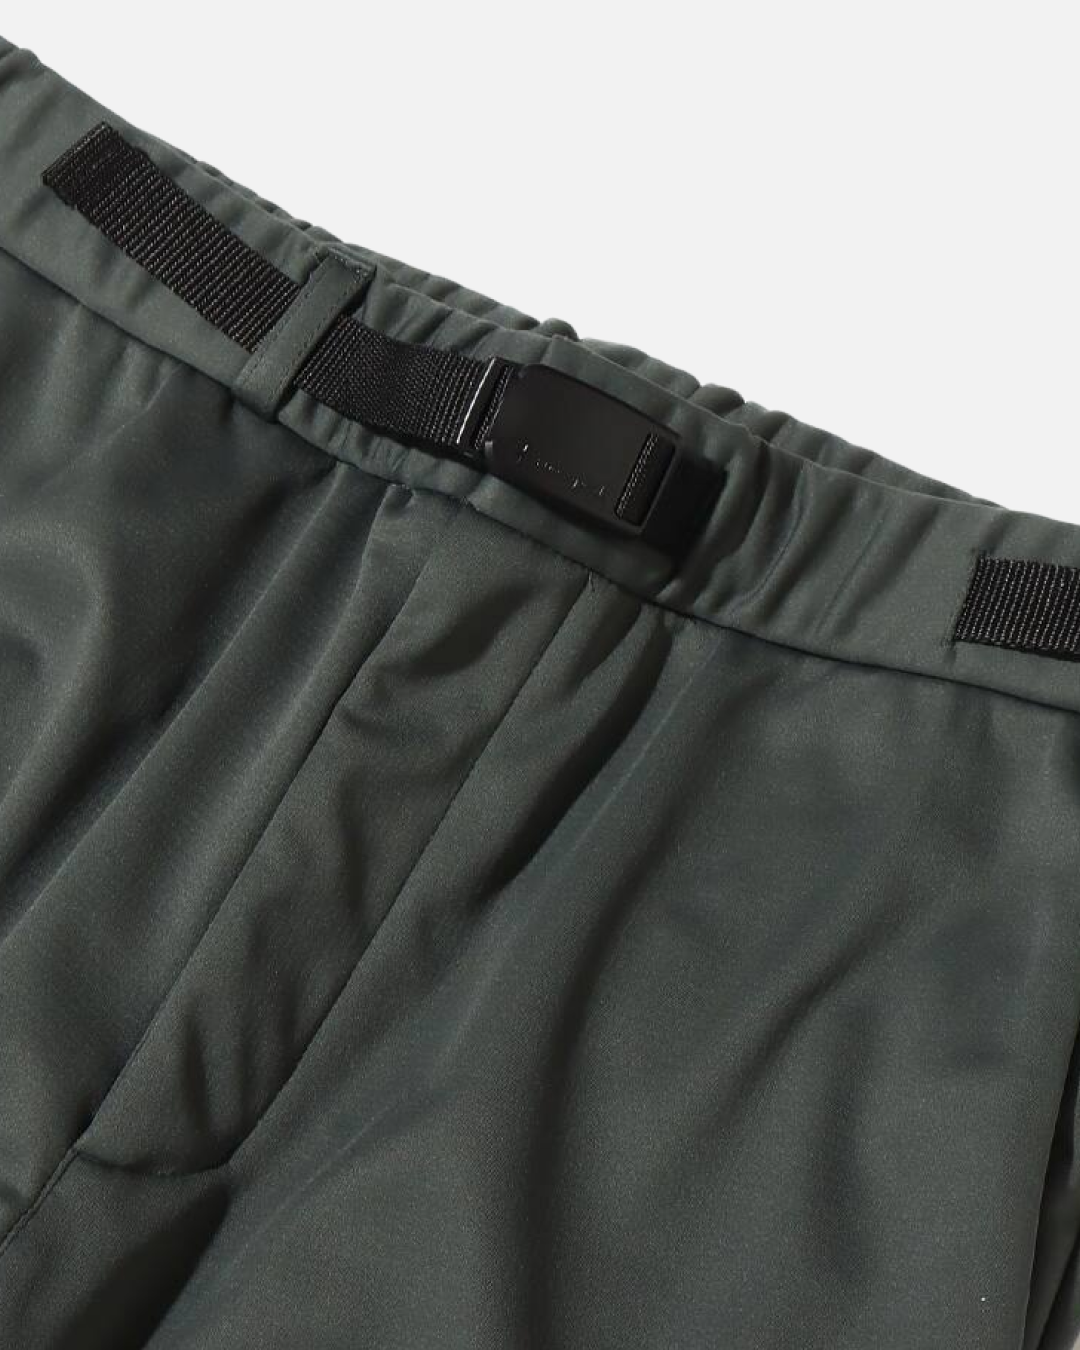 Recycled Soft Shell Pants - Forest Green